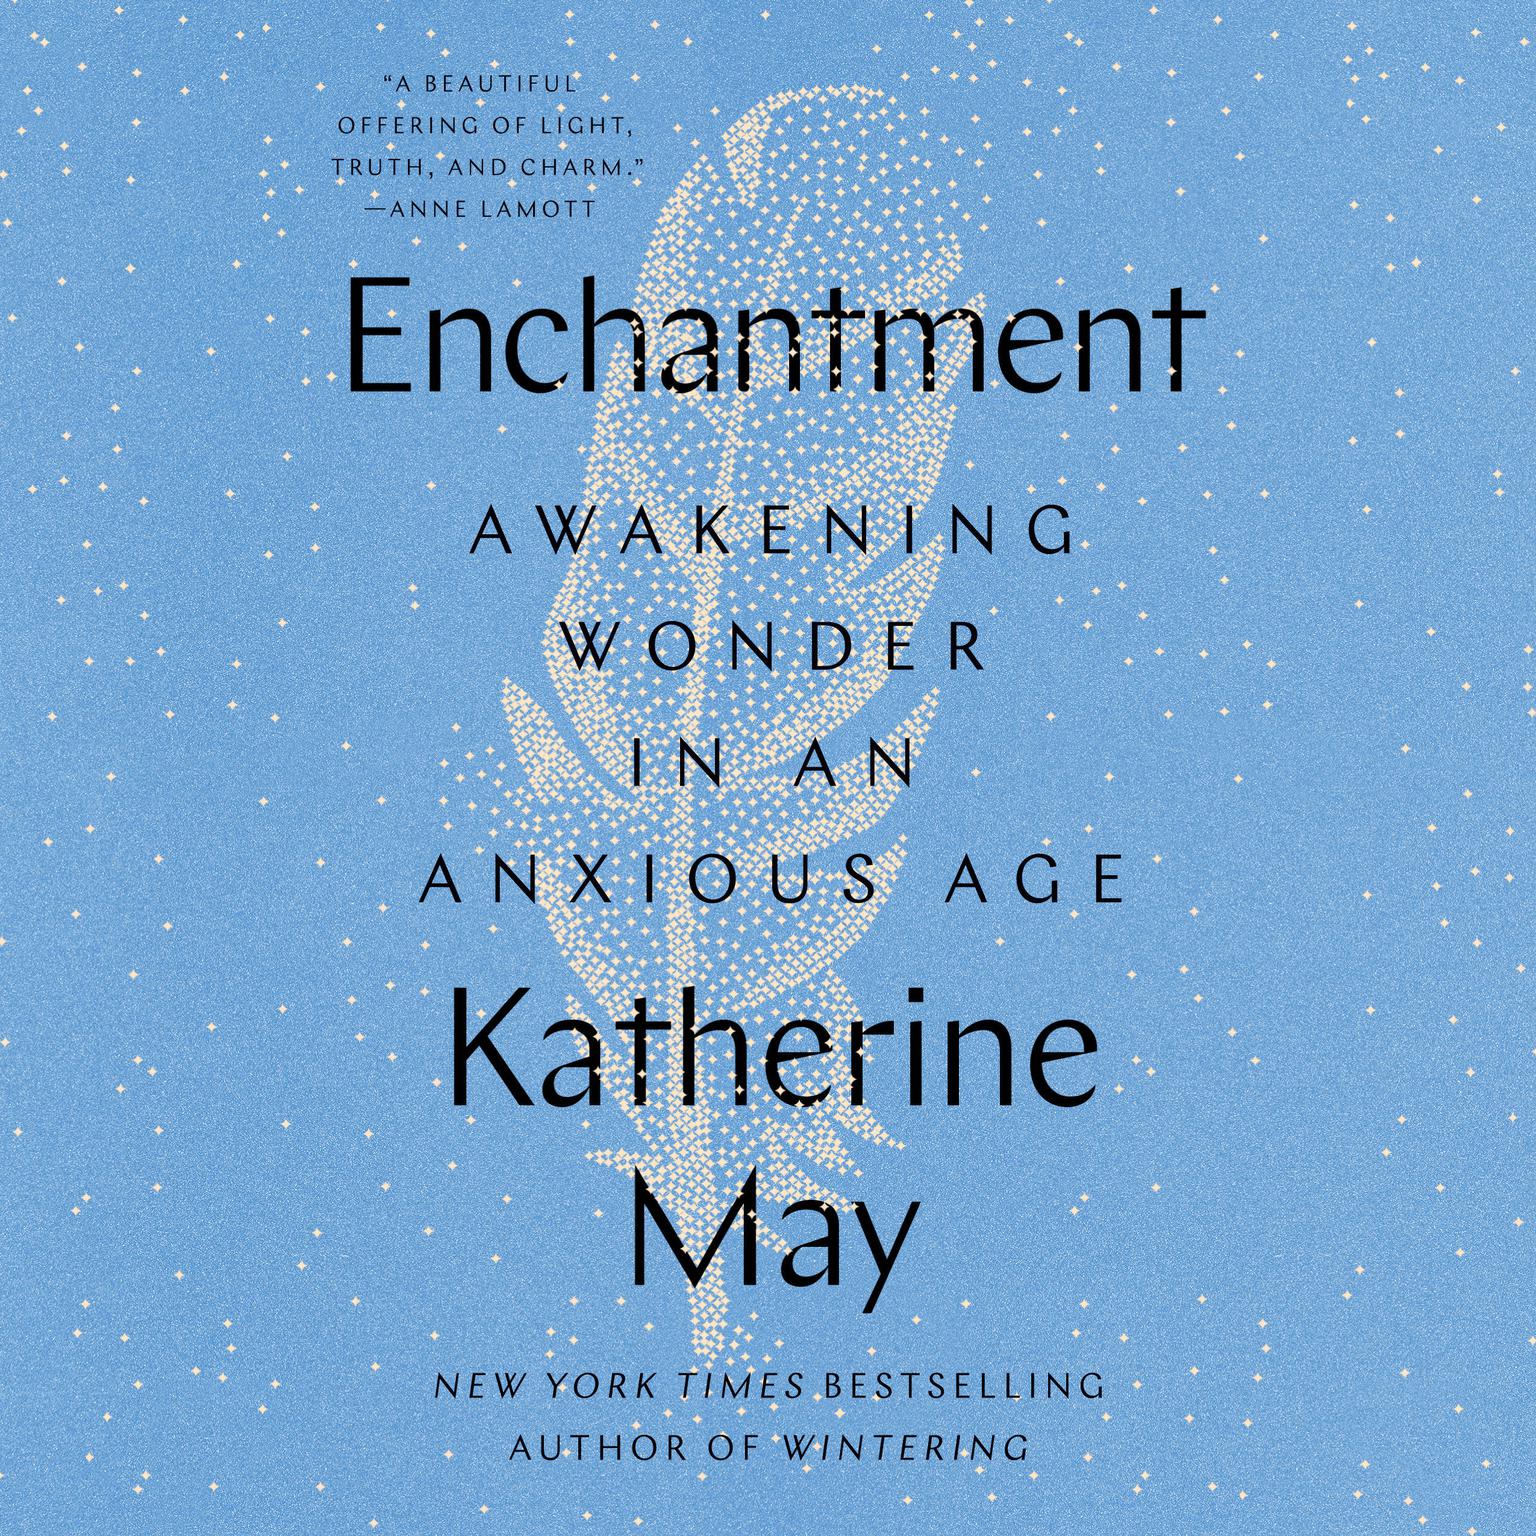 Enchantment: Awakening Wonder in an Anxious Age Audiobook, by Katherine May